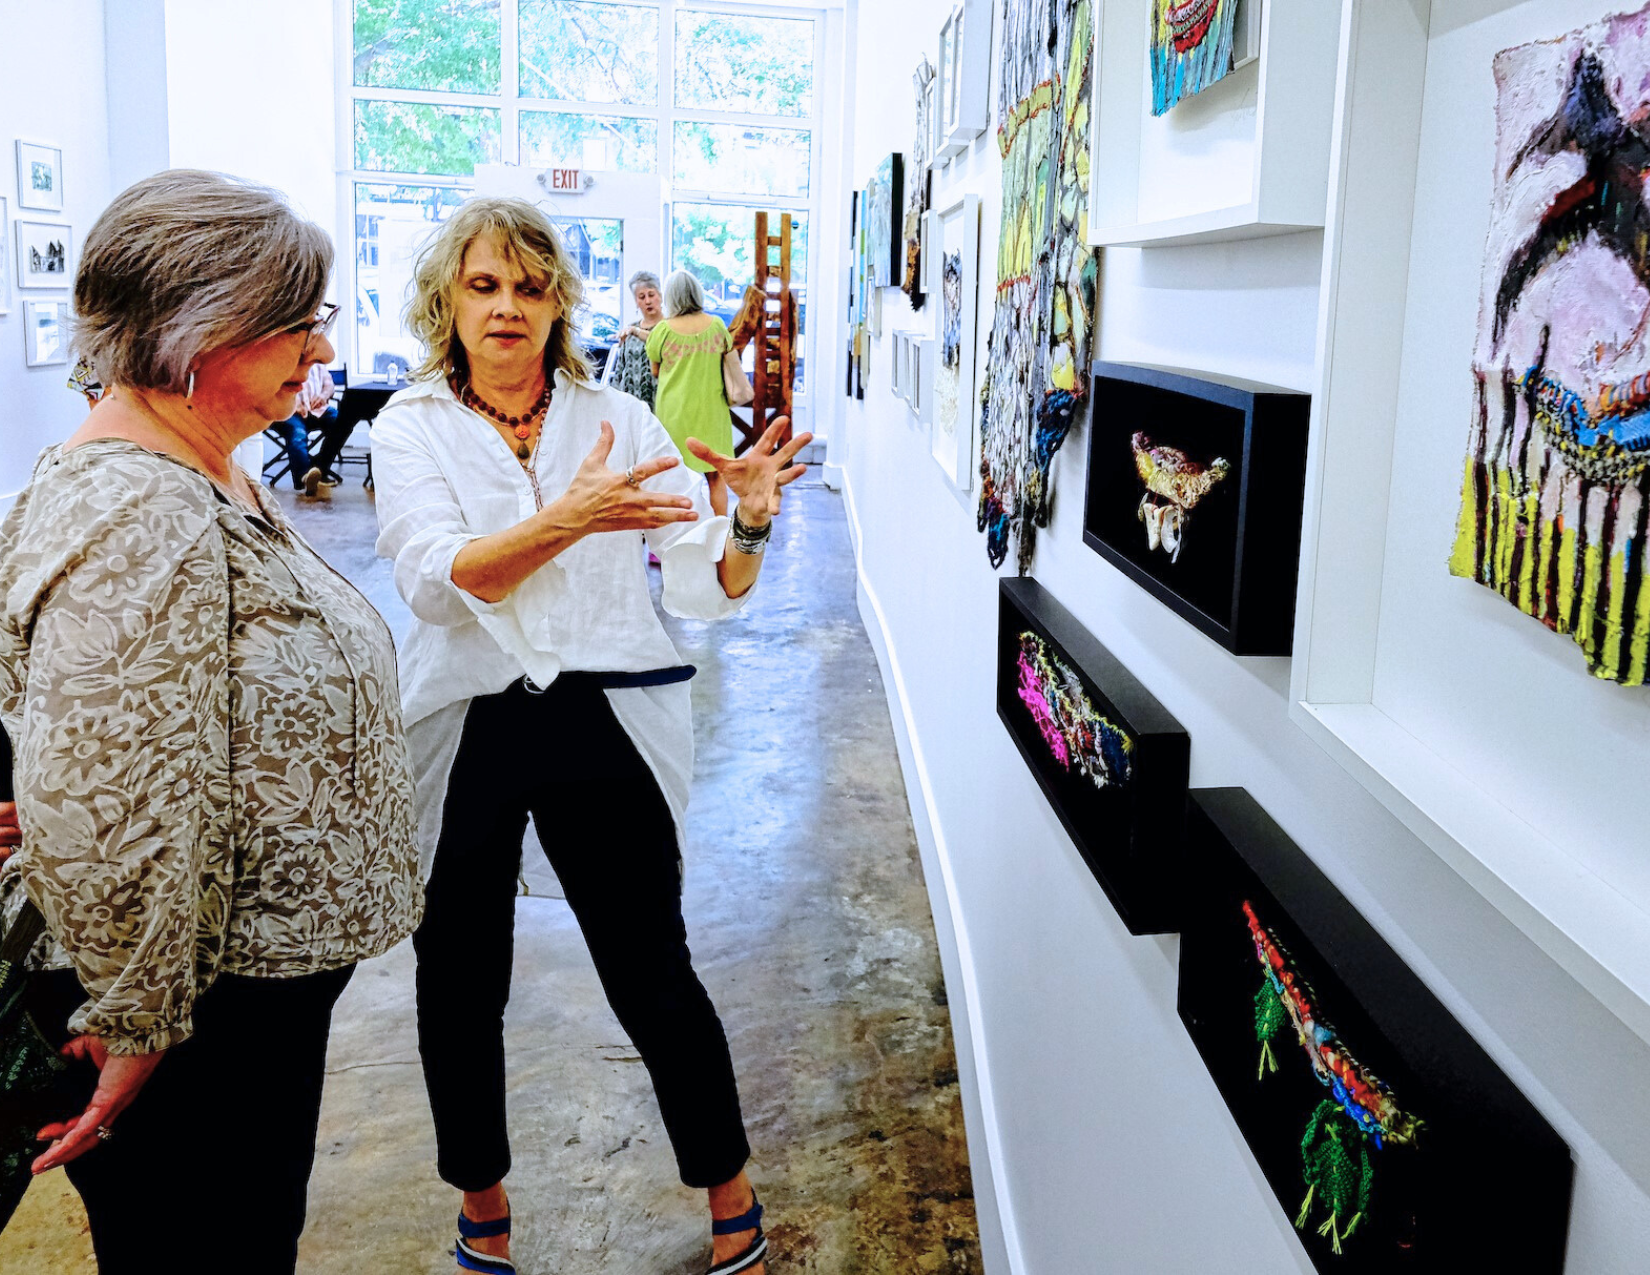 photo of Staci Swider talking to art patron. Staci is a Caucasian woman with short blonde hair. She is wearing a white button down shirt with black skinny jeans.